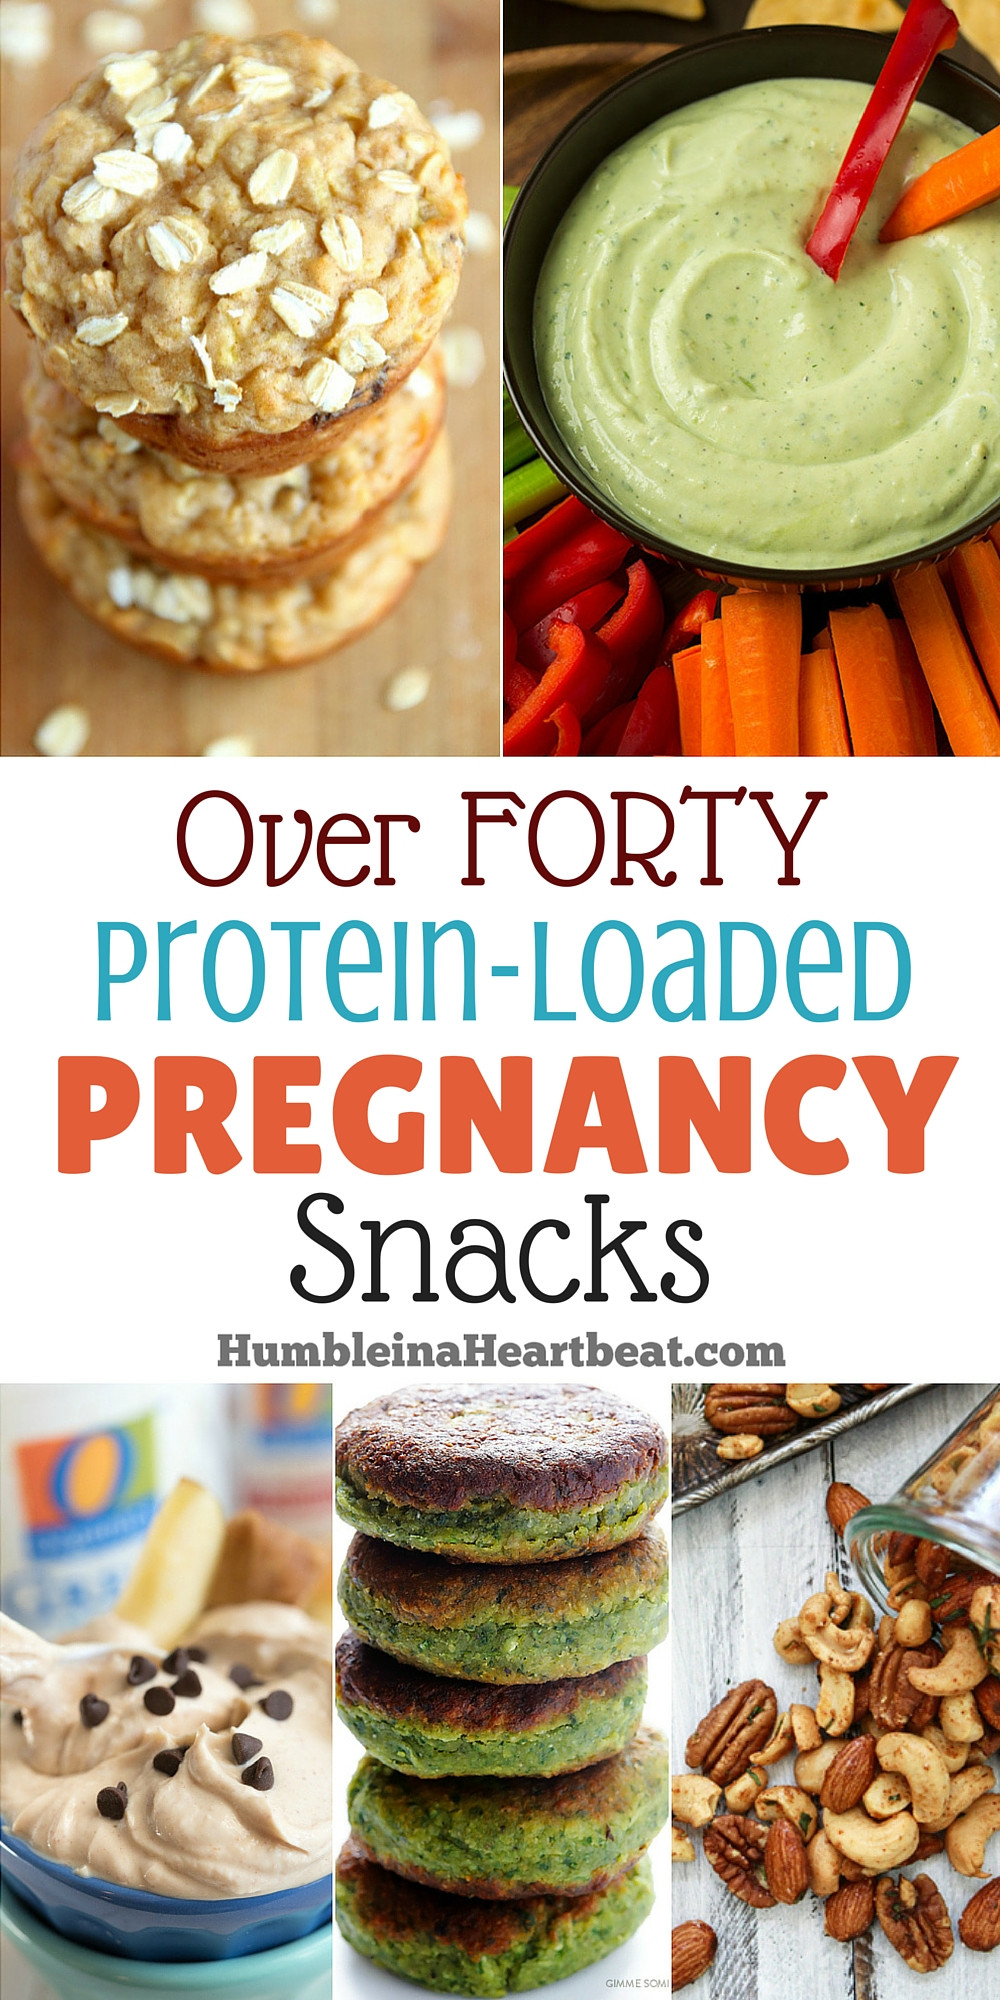 Healthy Pregnancy Snacks
 40 Amazing Pregnancy Snacks with Tons of Protein